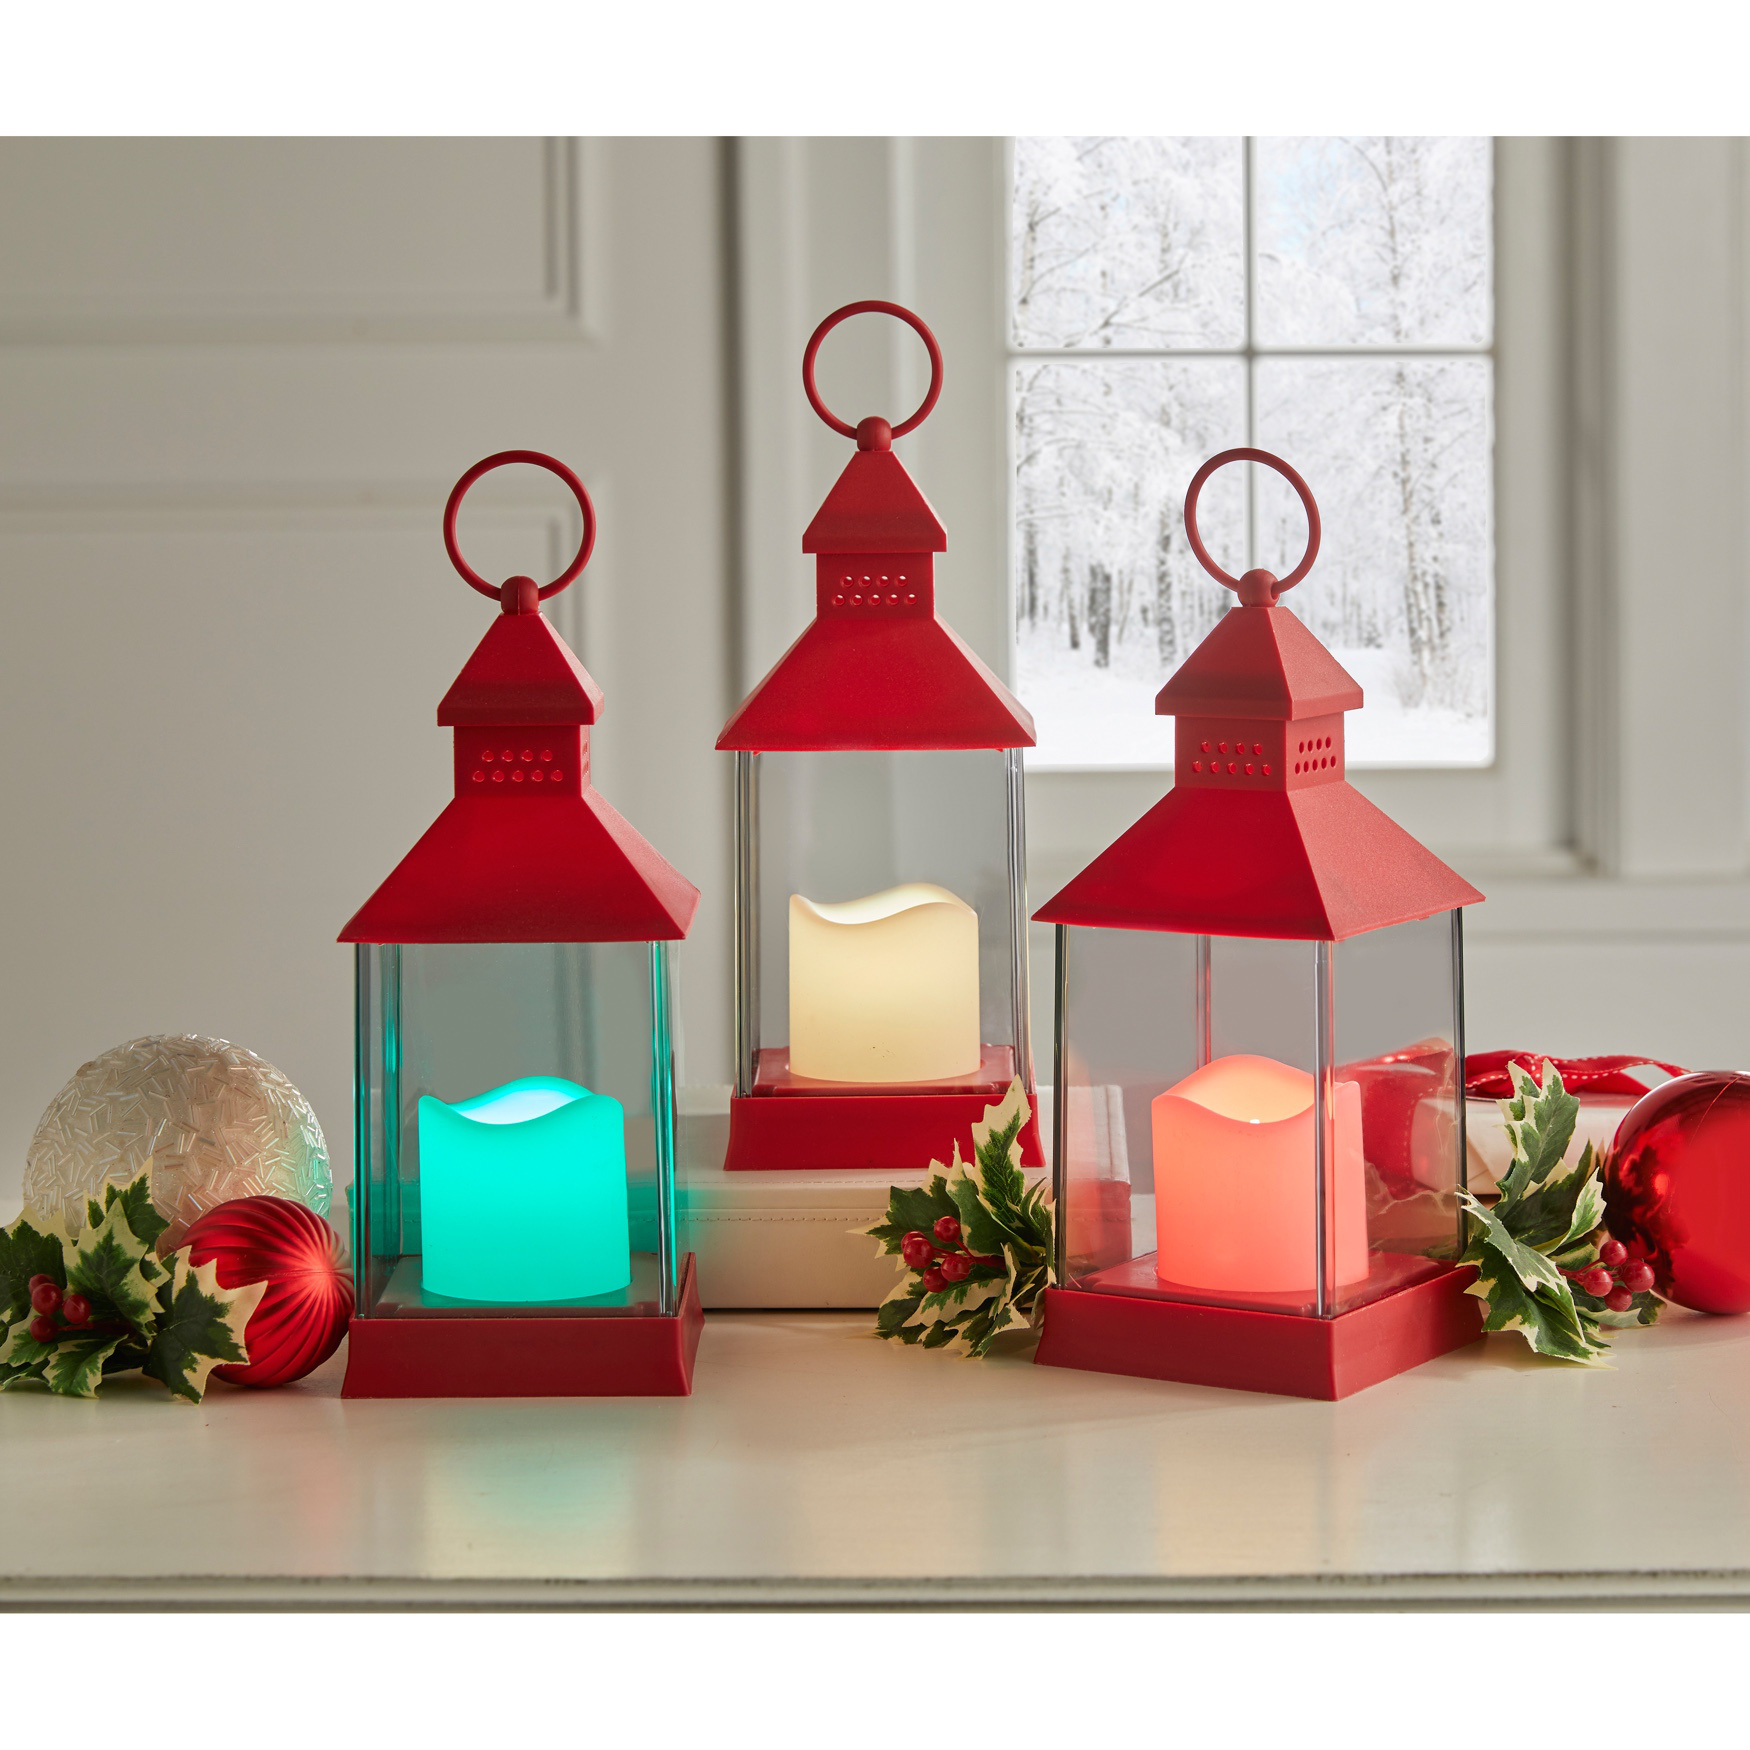 REMOTE-CONTROLLED RED COLOR-CHANGING LANTERNS, SET OF 3, RED